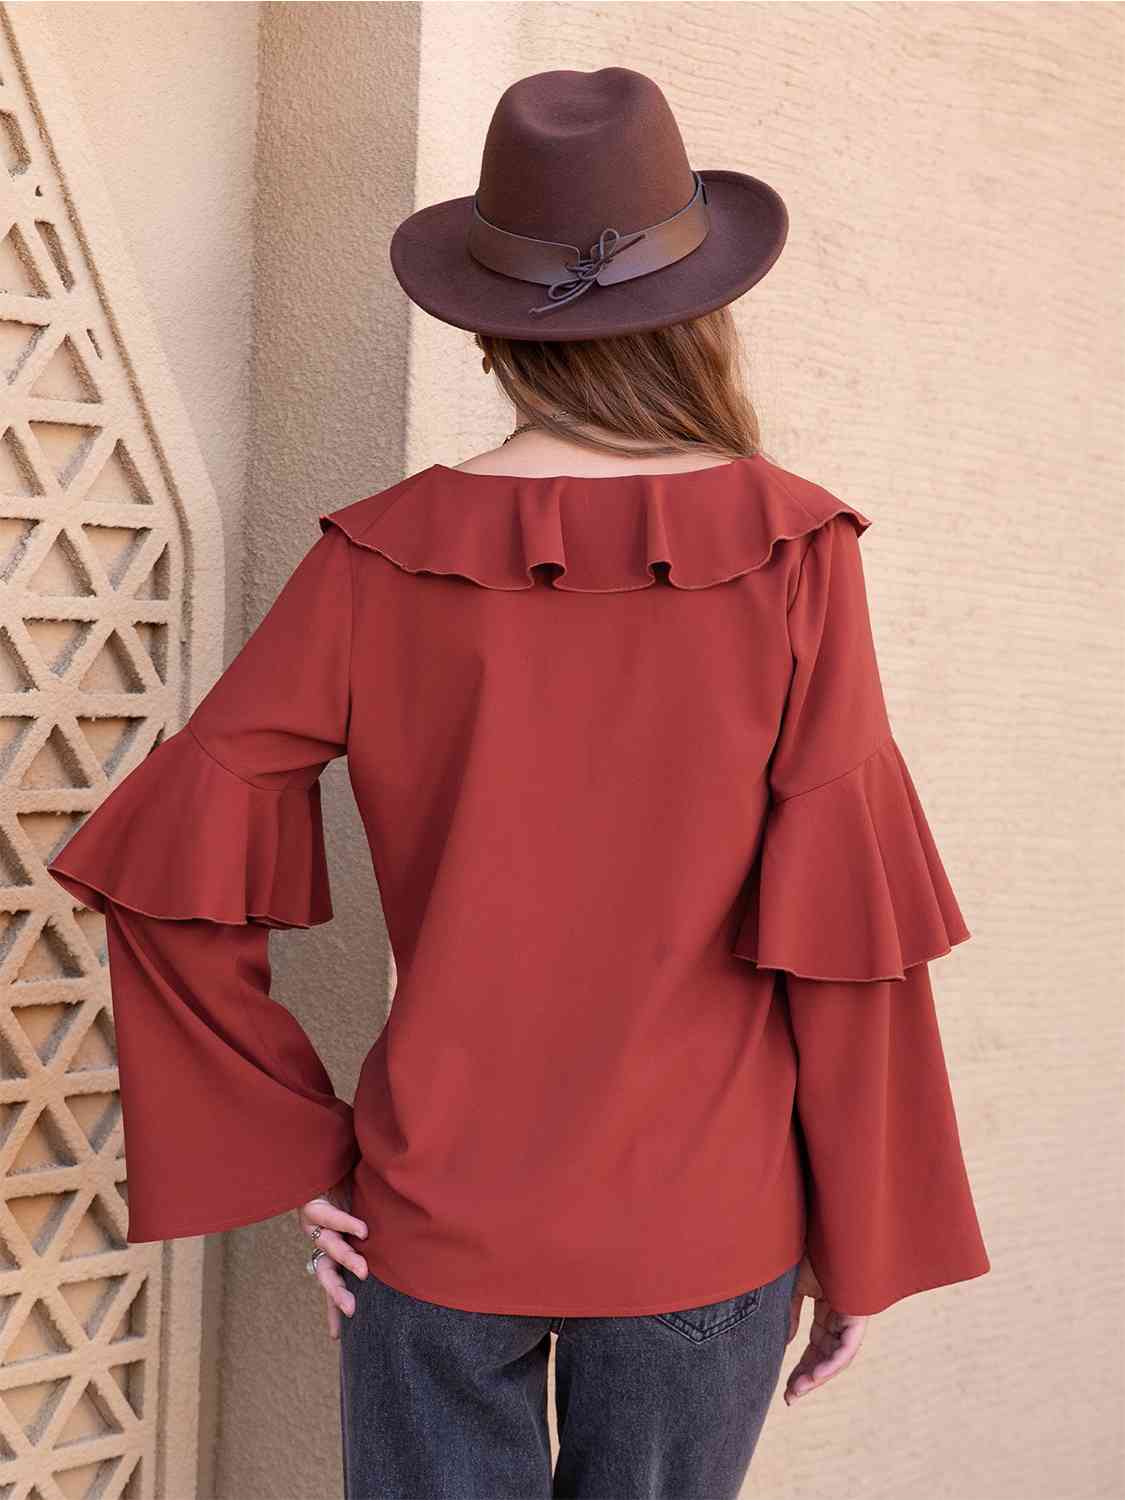 Tan Statement Collar Long Sleeve Blouse Sentient Beauty Fashions Apparel & Accessories